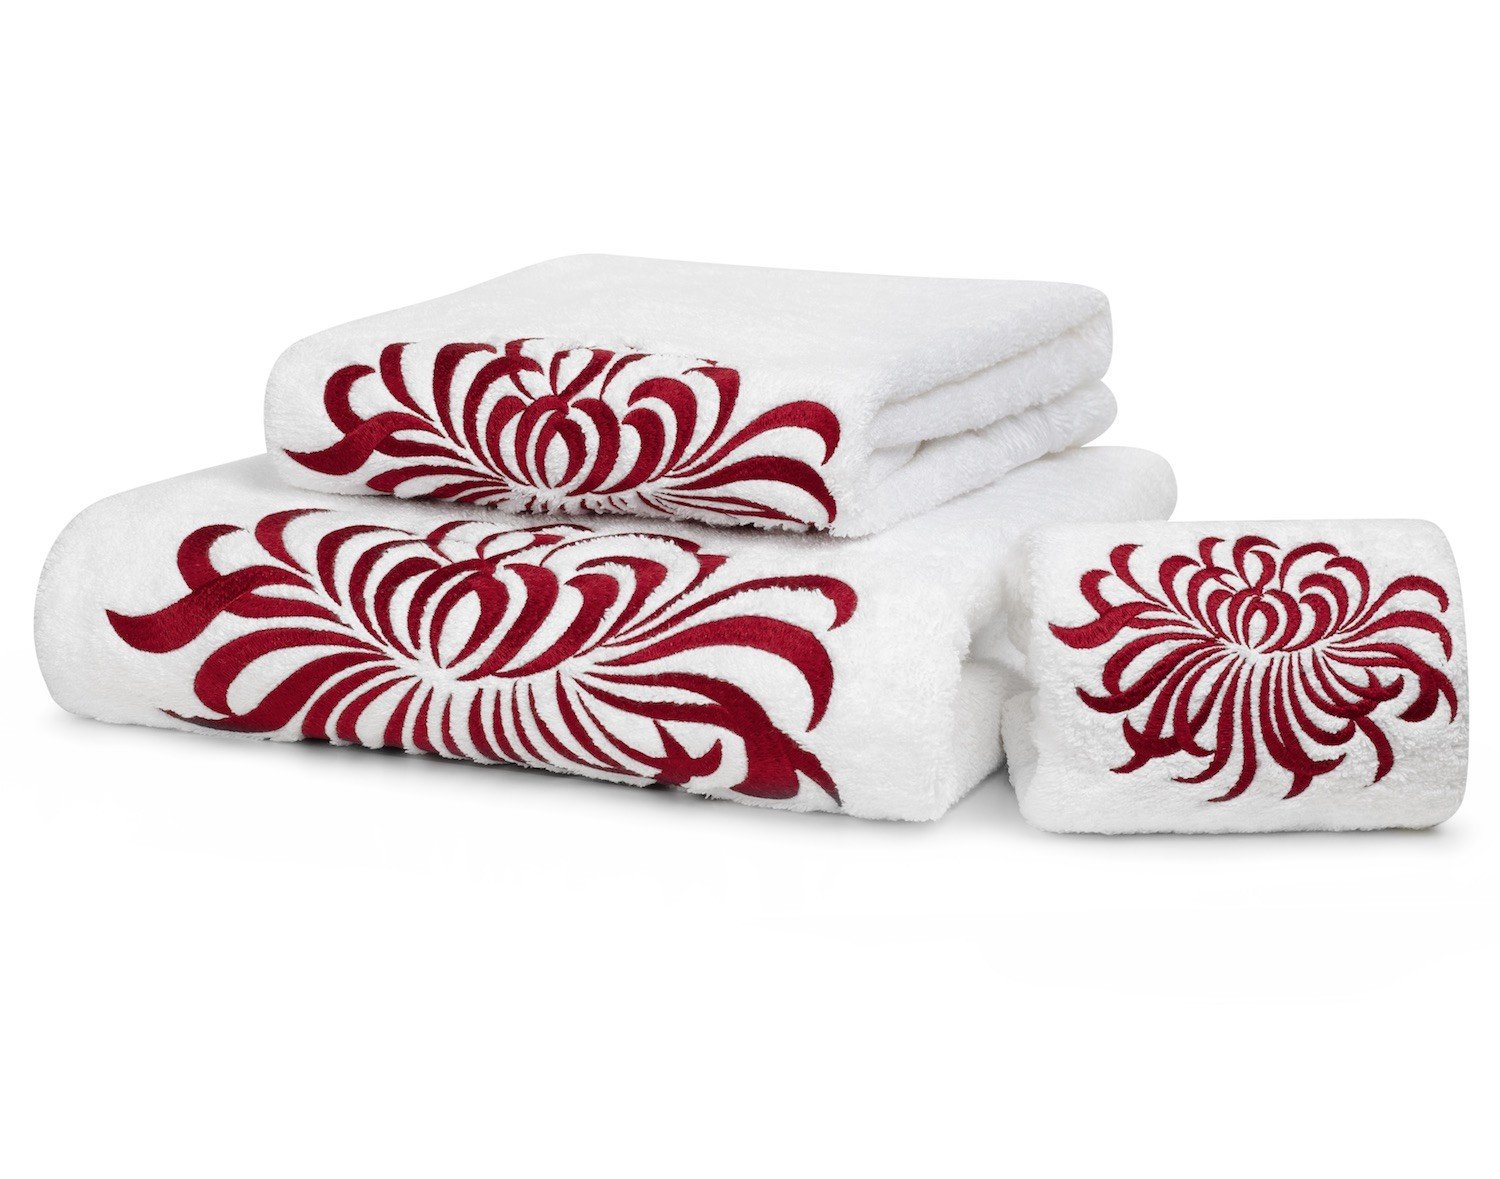 TOKYO embroidered bath towels